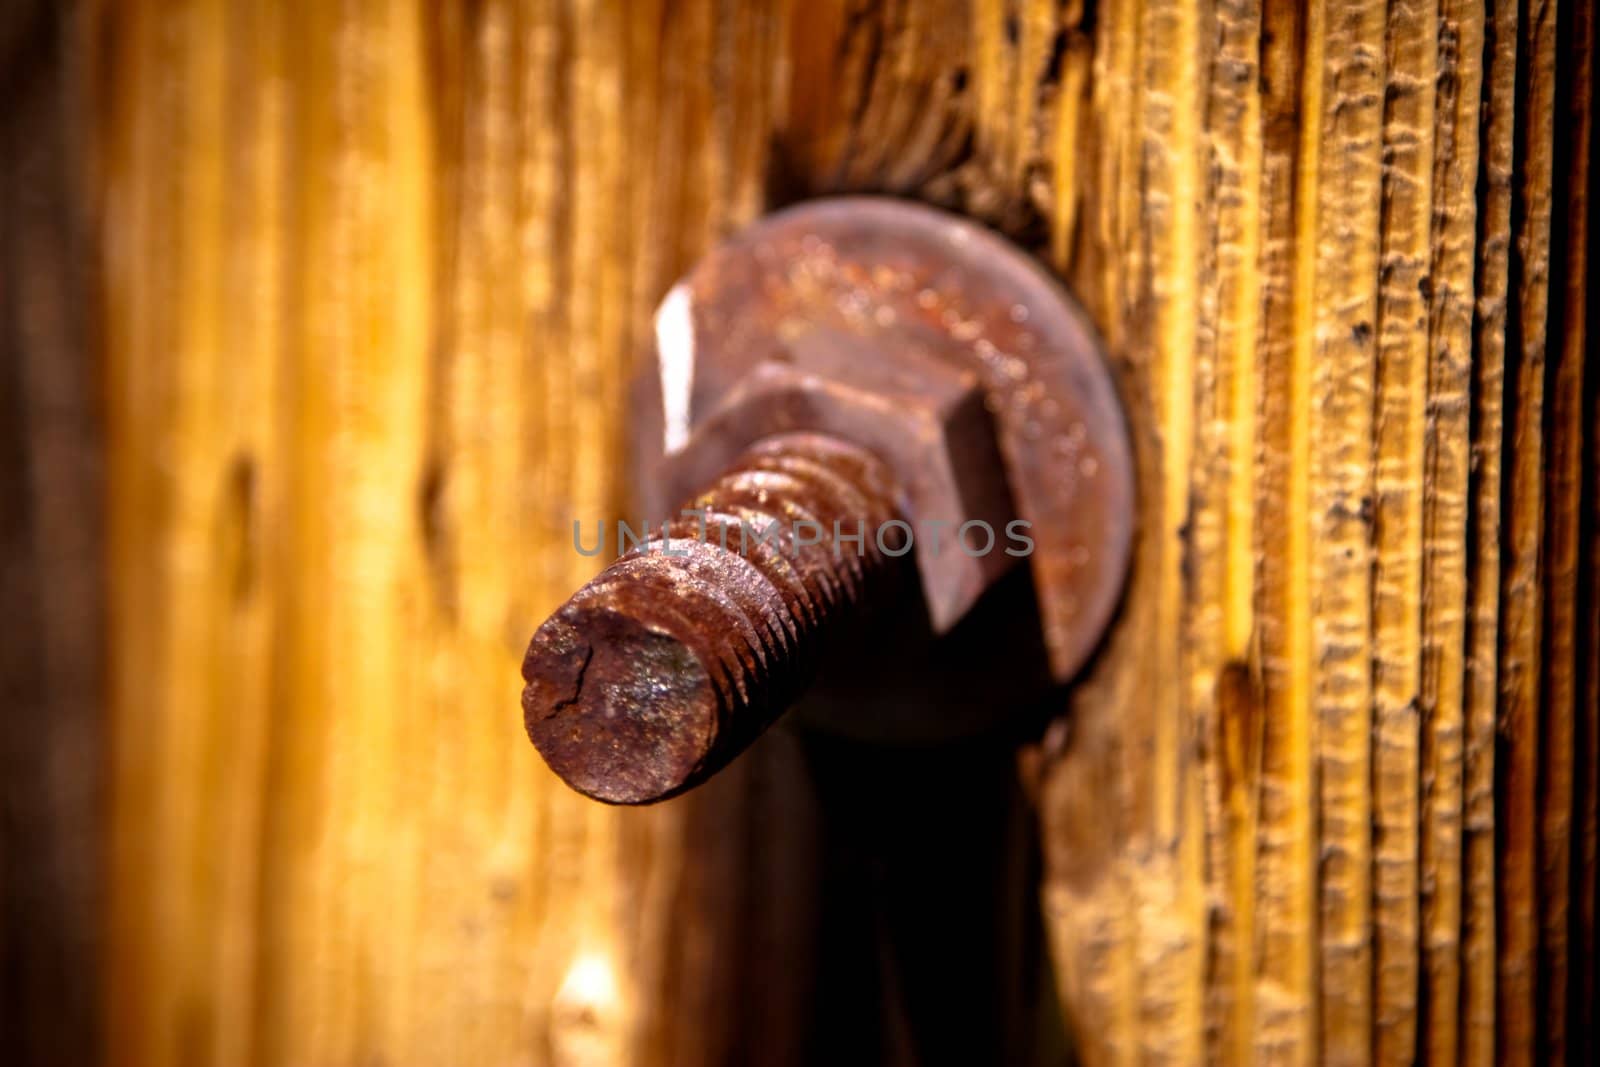 Grunge image of a rusty old bolt and nut in a wooden old post